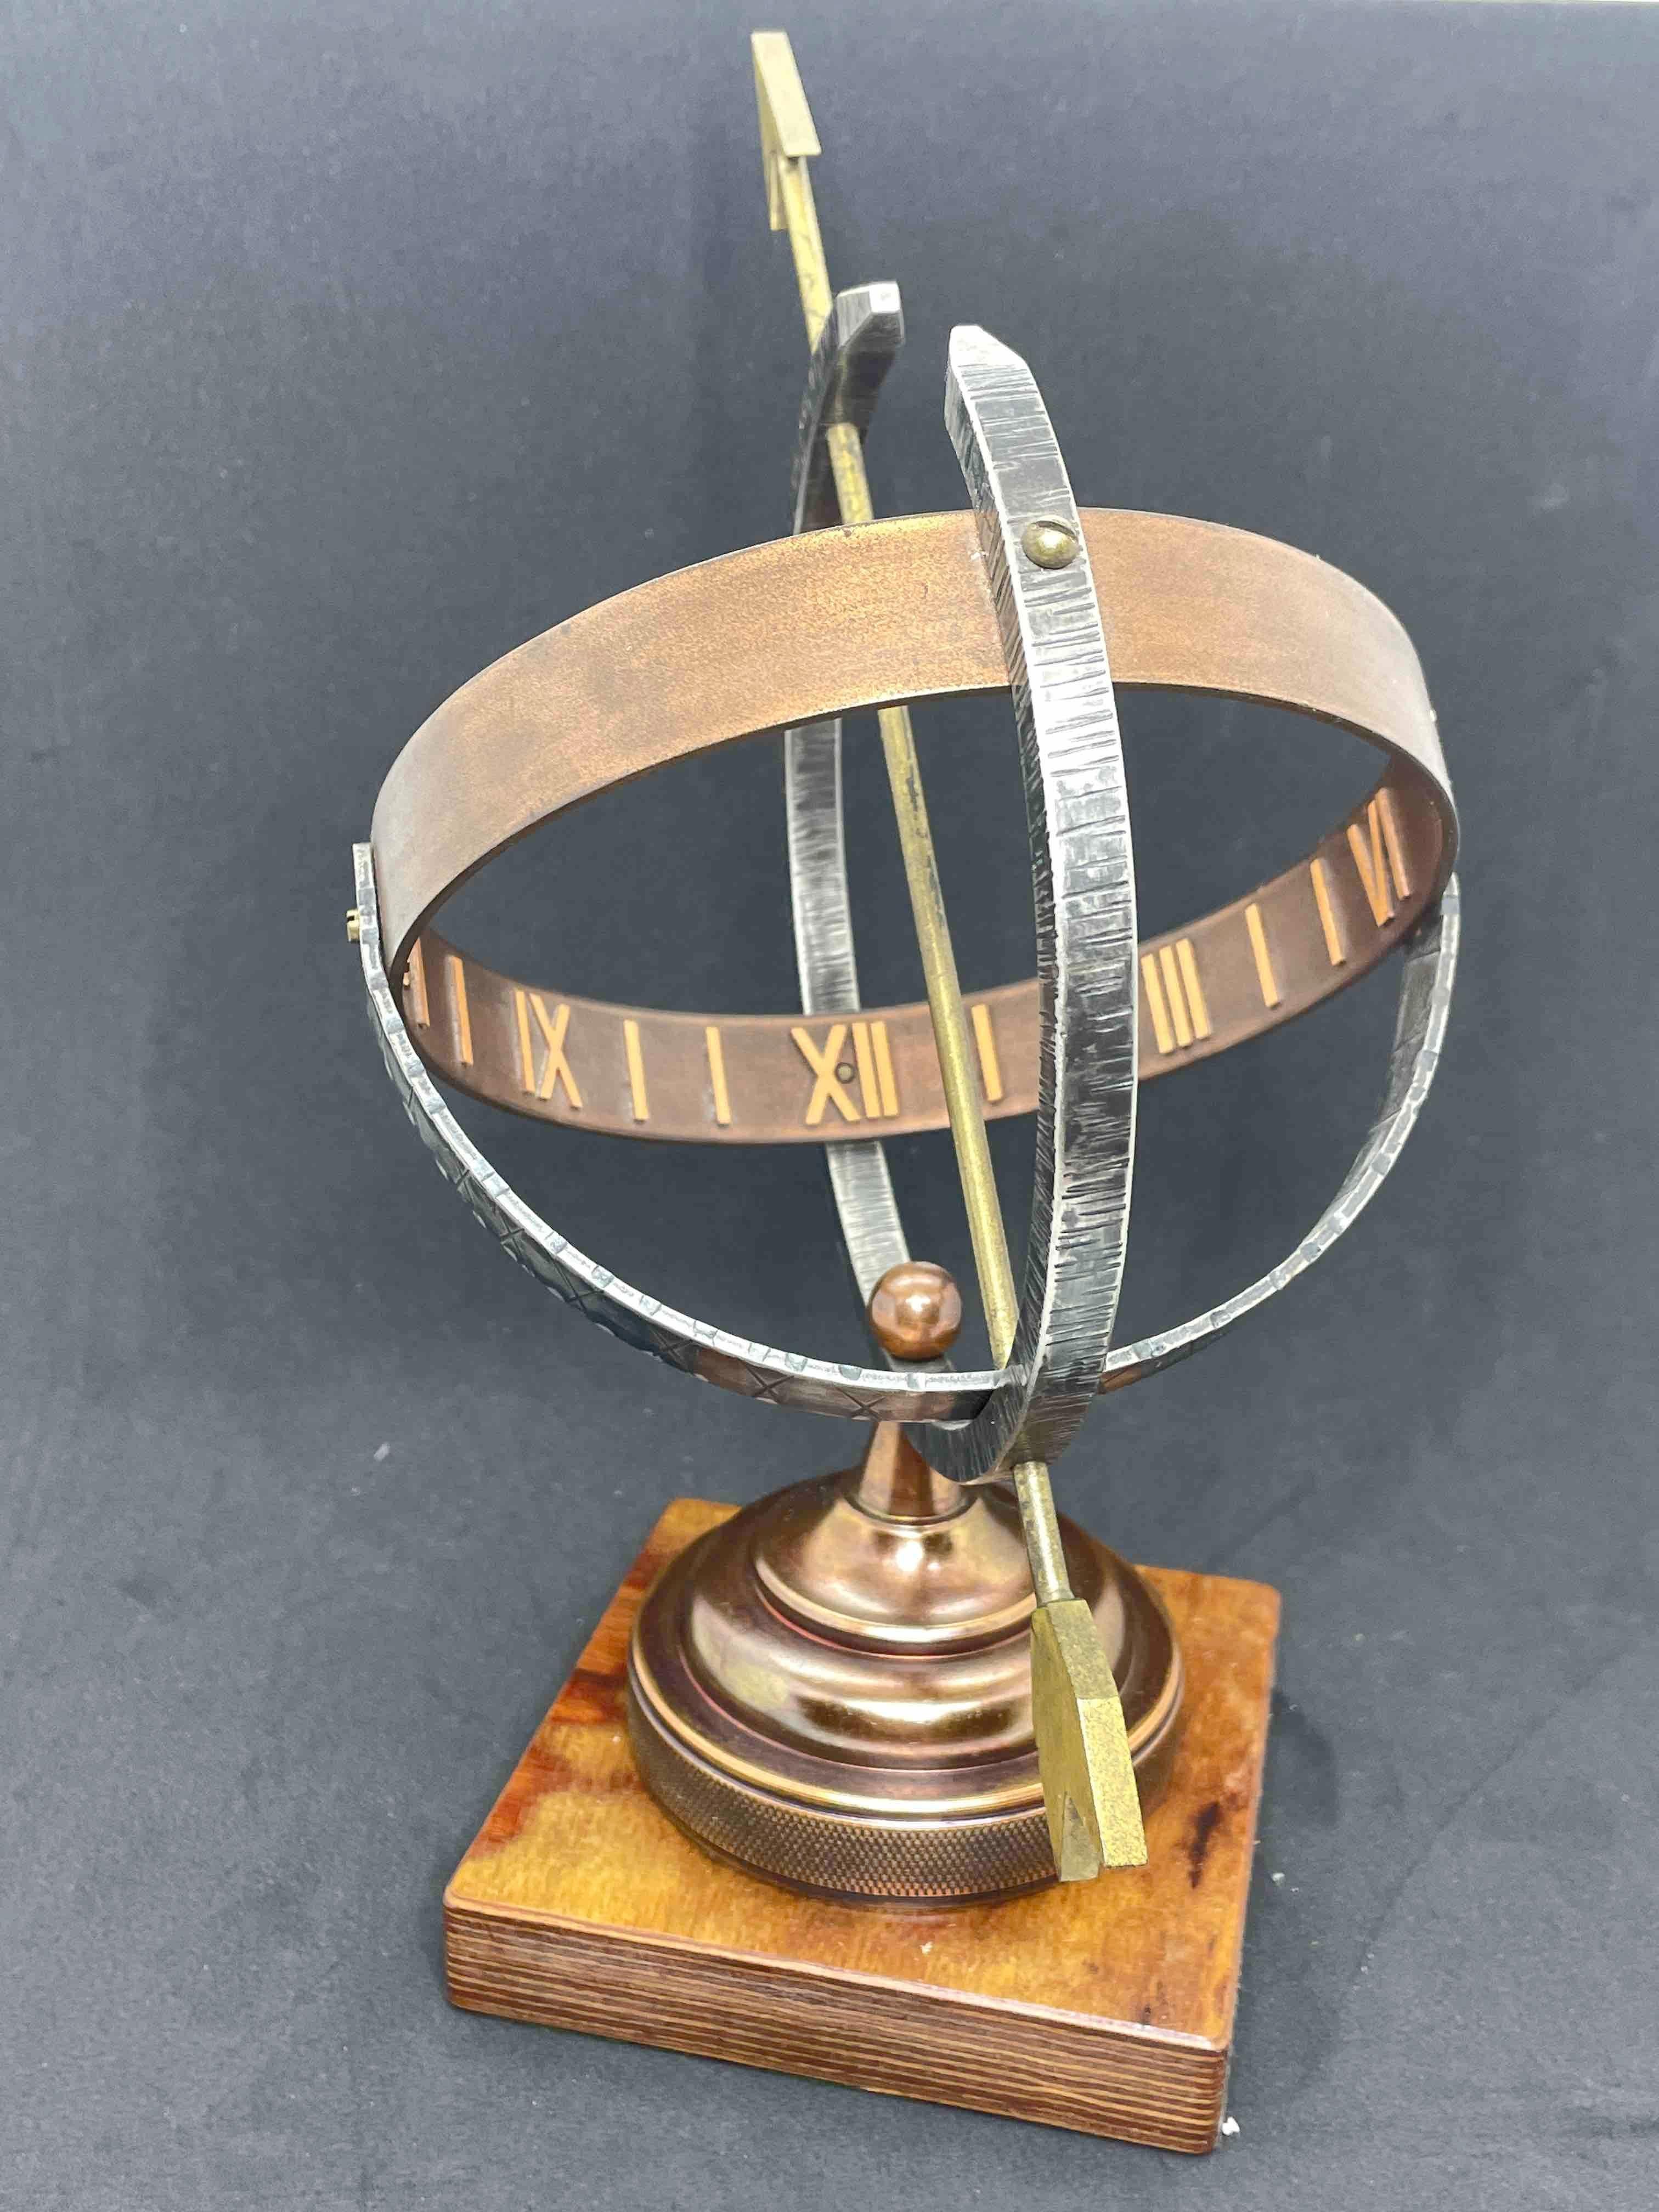 Mid-20th Century Vintage Brass & Copper Sun Clock Armillary Sun Dial on Wooden Base, German 1960s For Sale